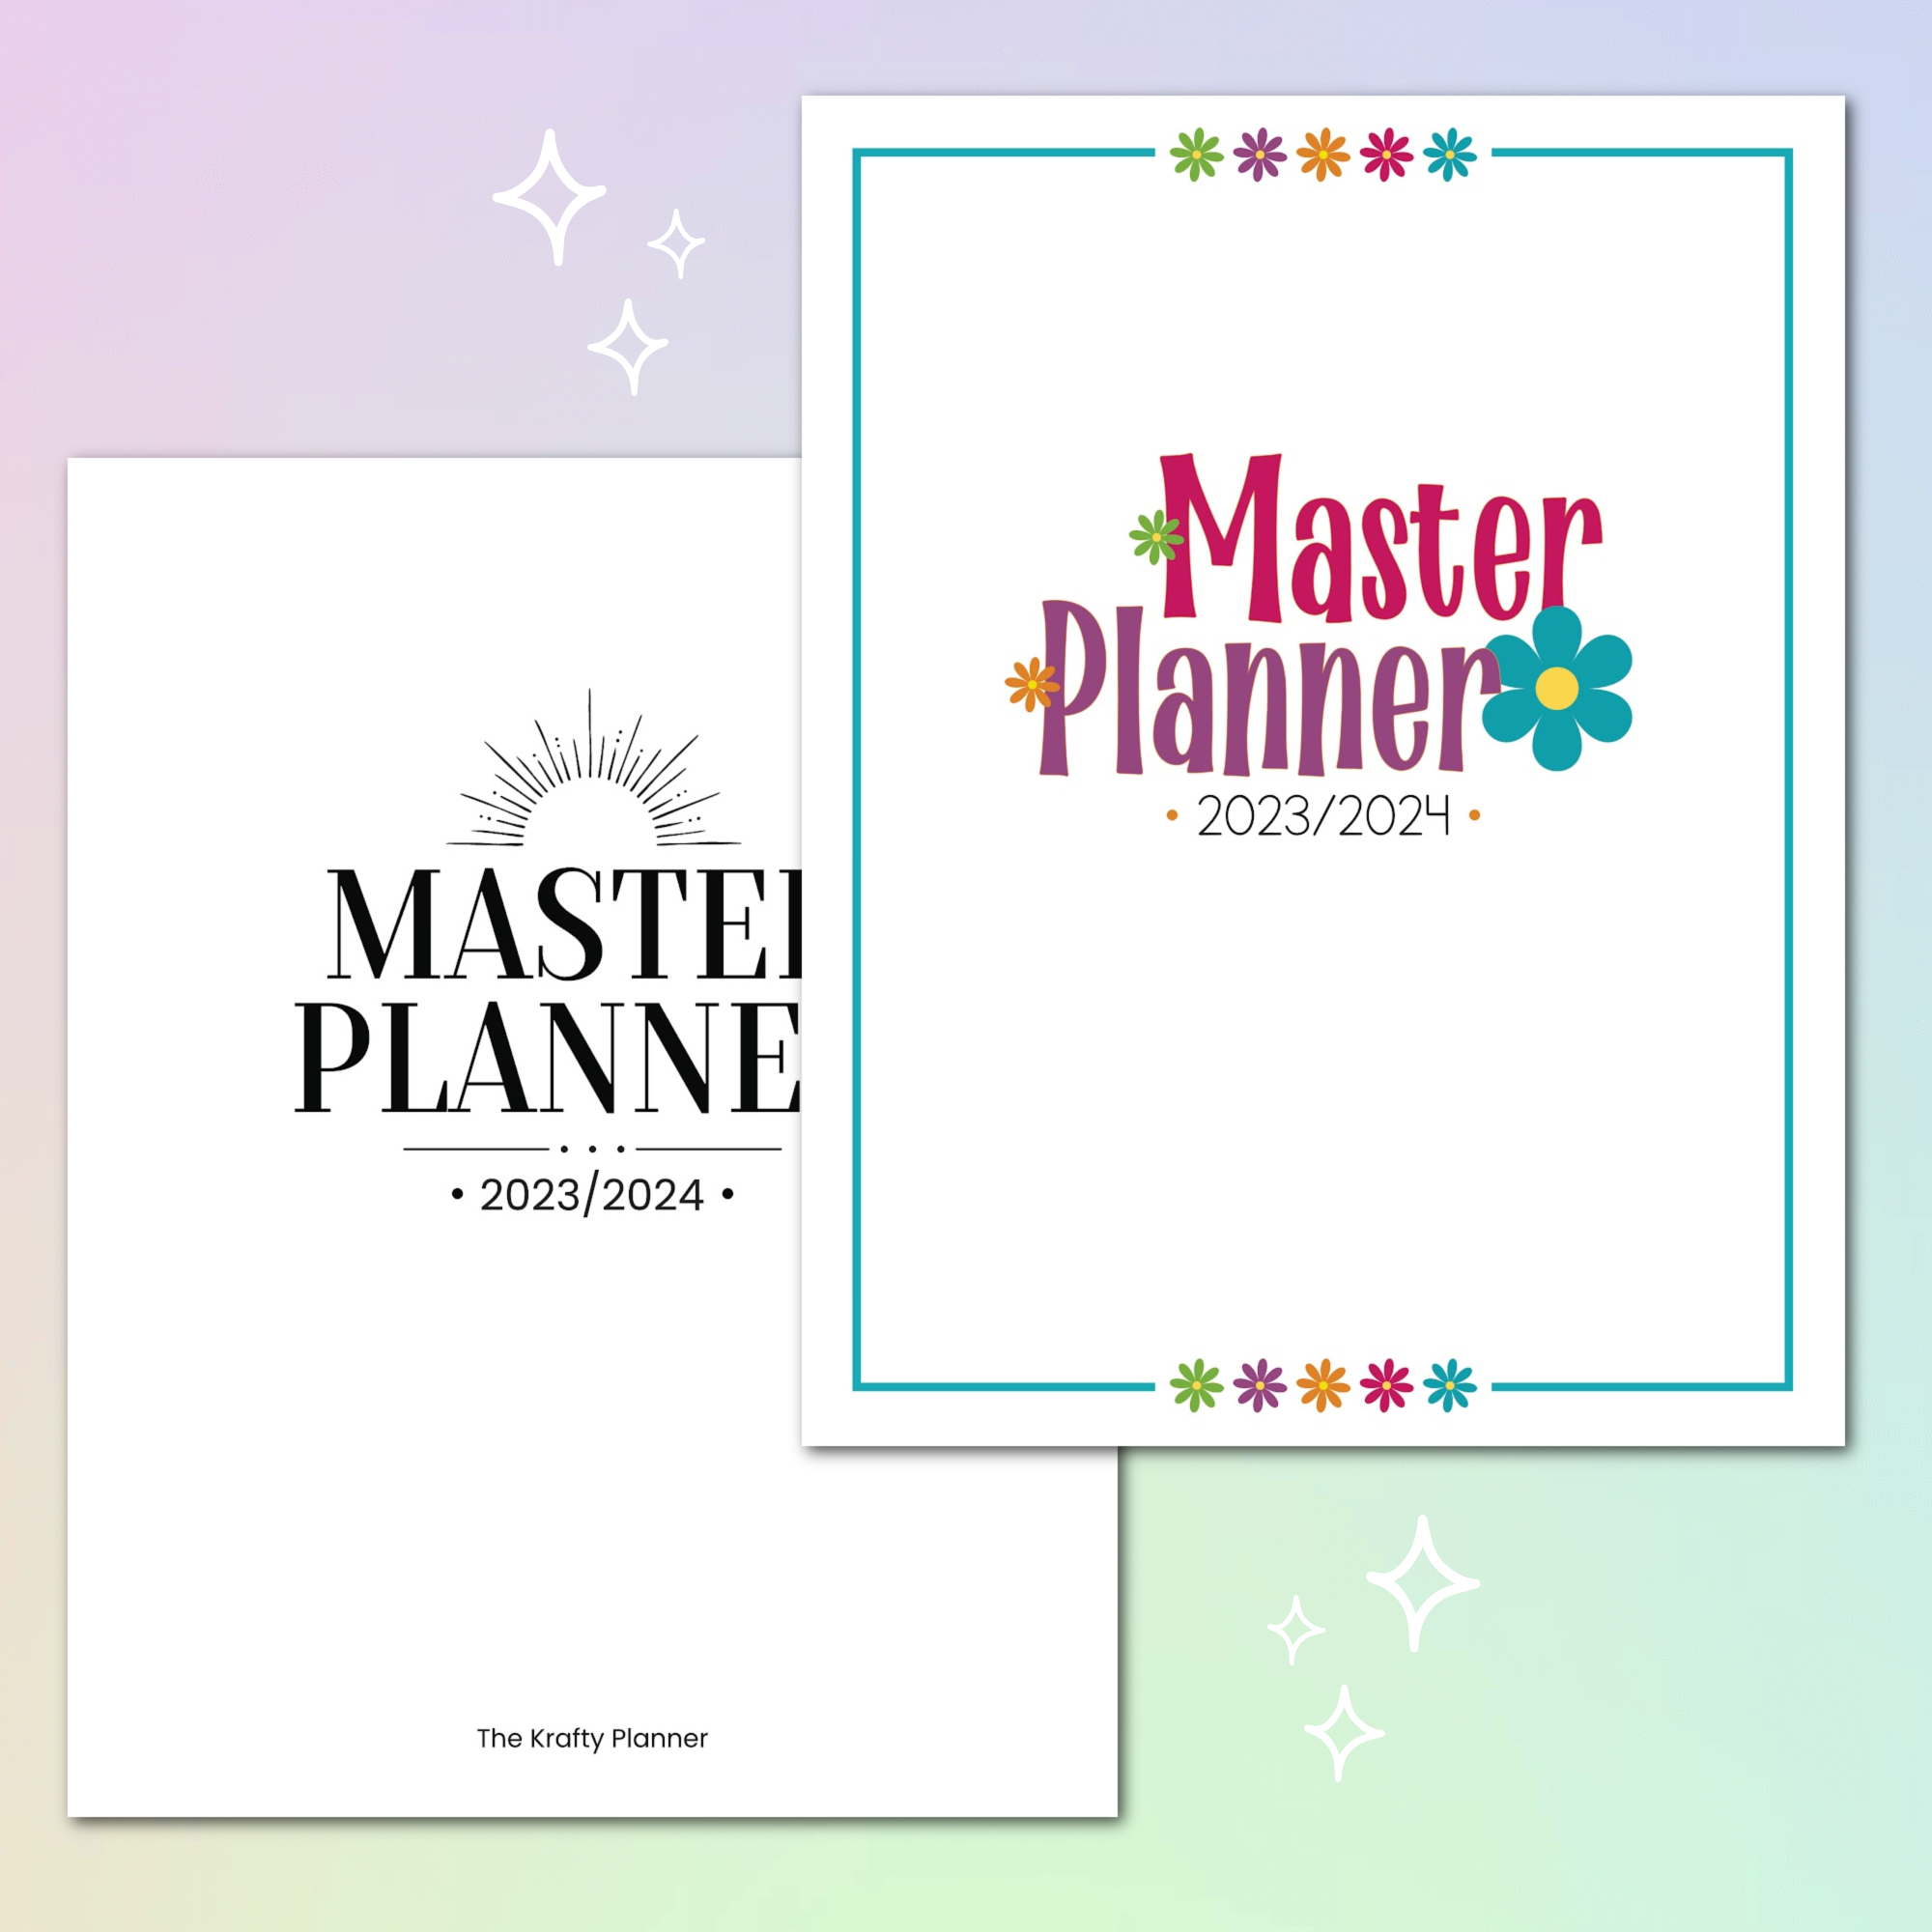 Introducing the 2023/2024 Master Planner: Your Ultimate Organizational Companion